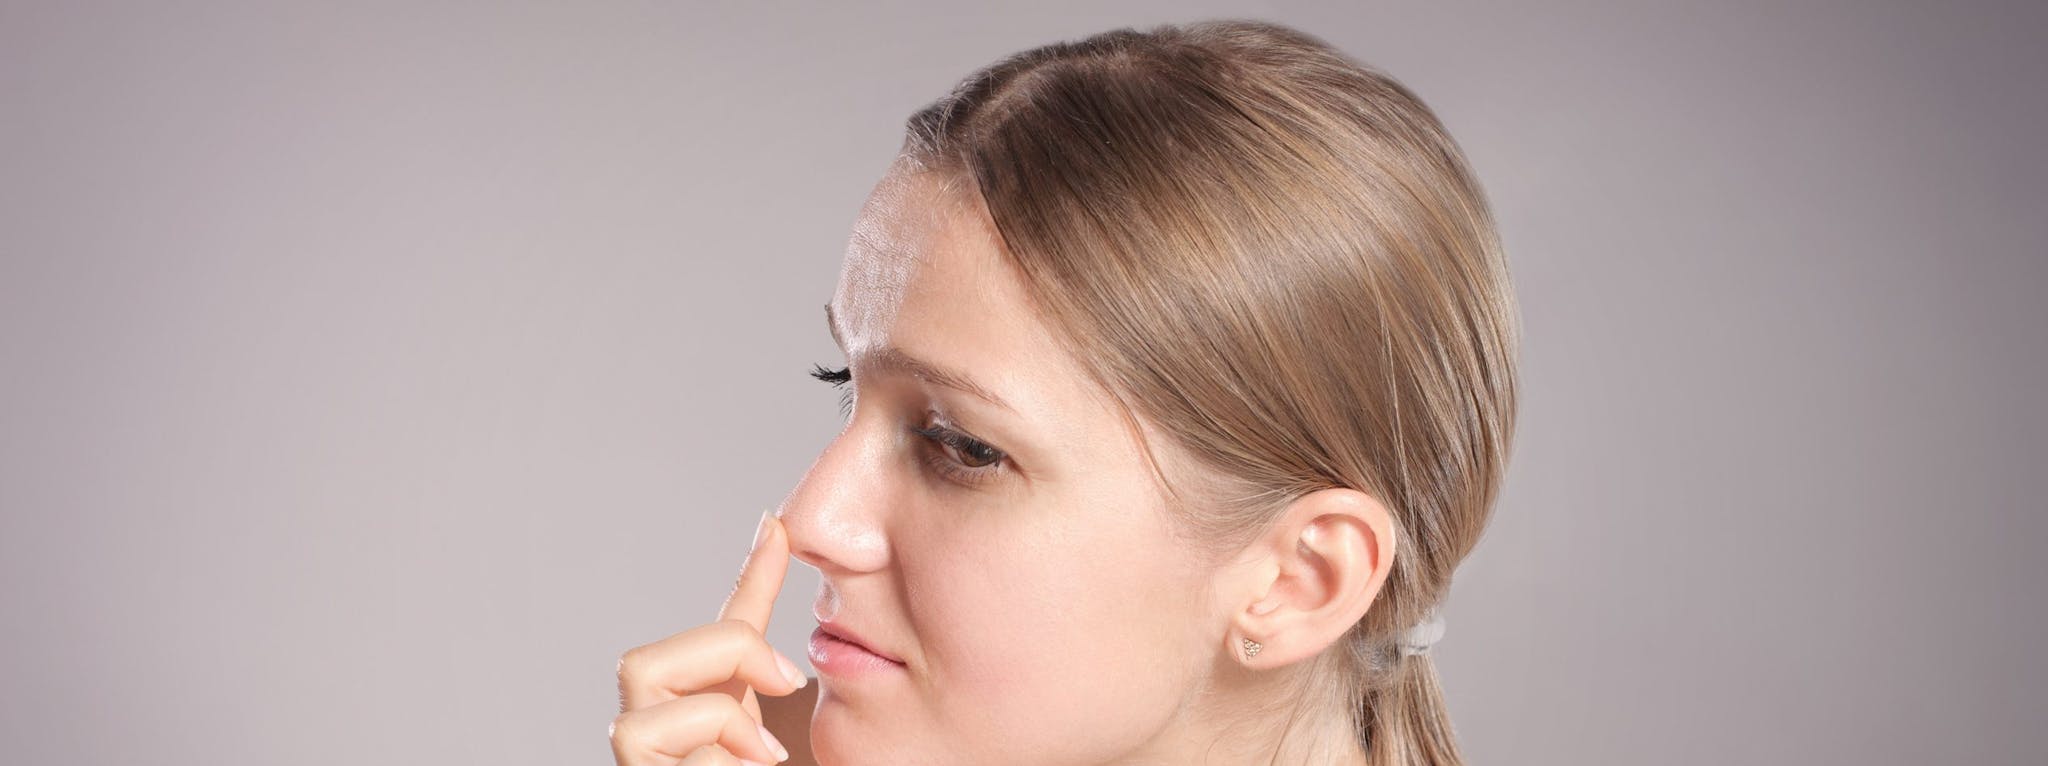 Rhinoplasty Boosts Your Confidence